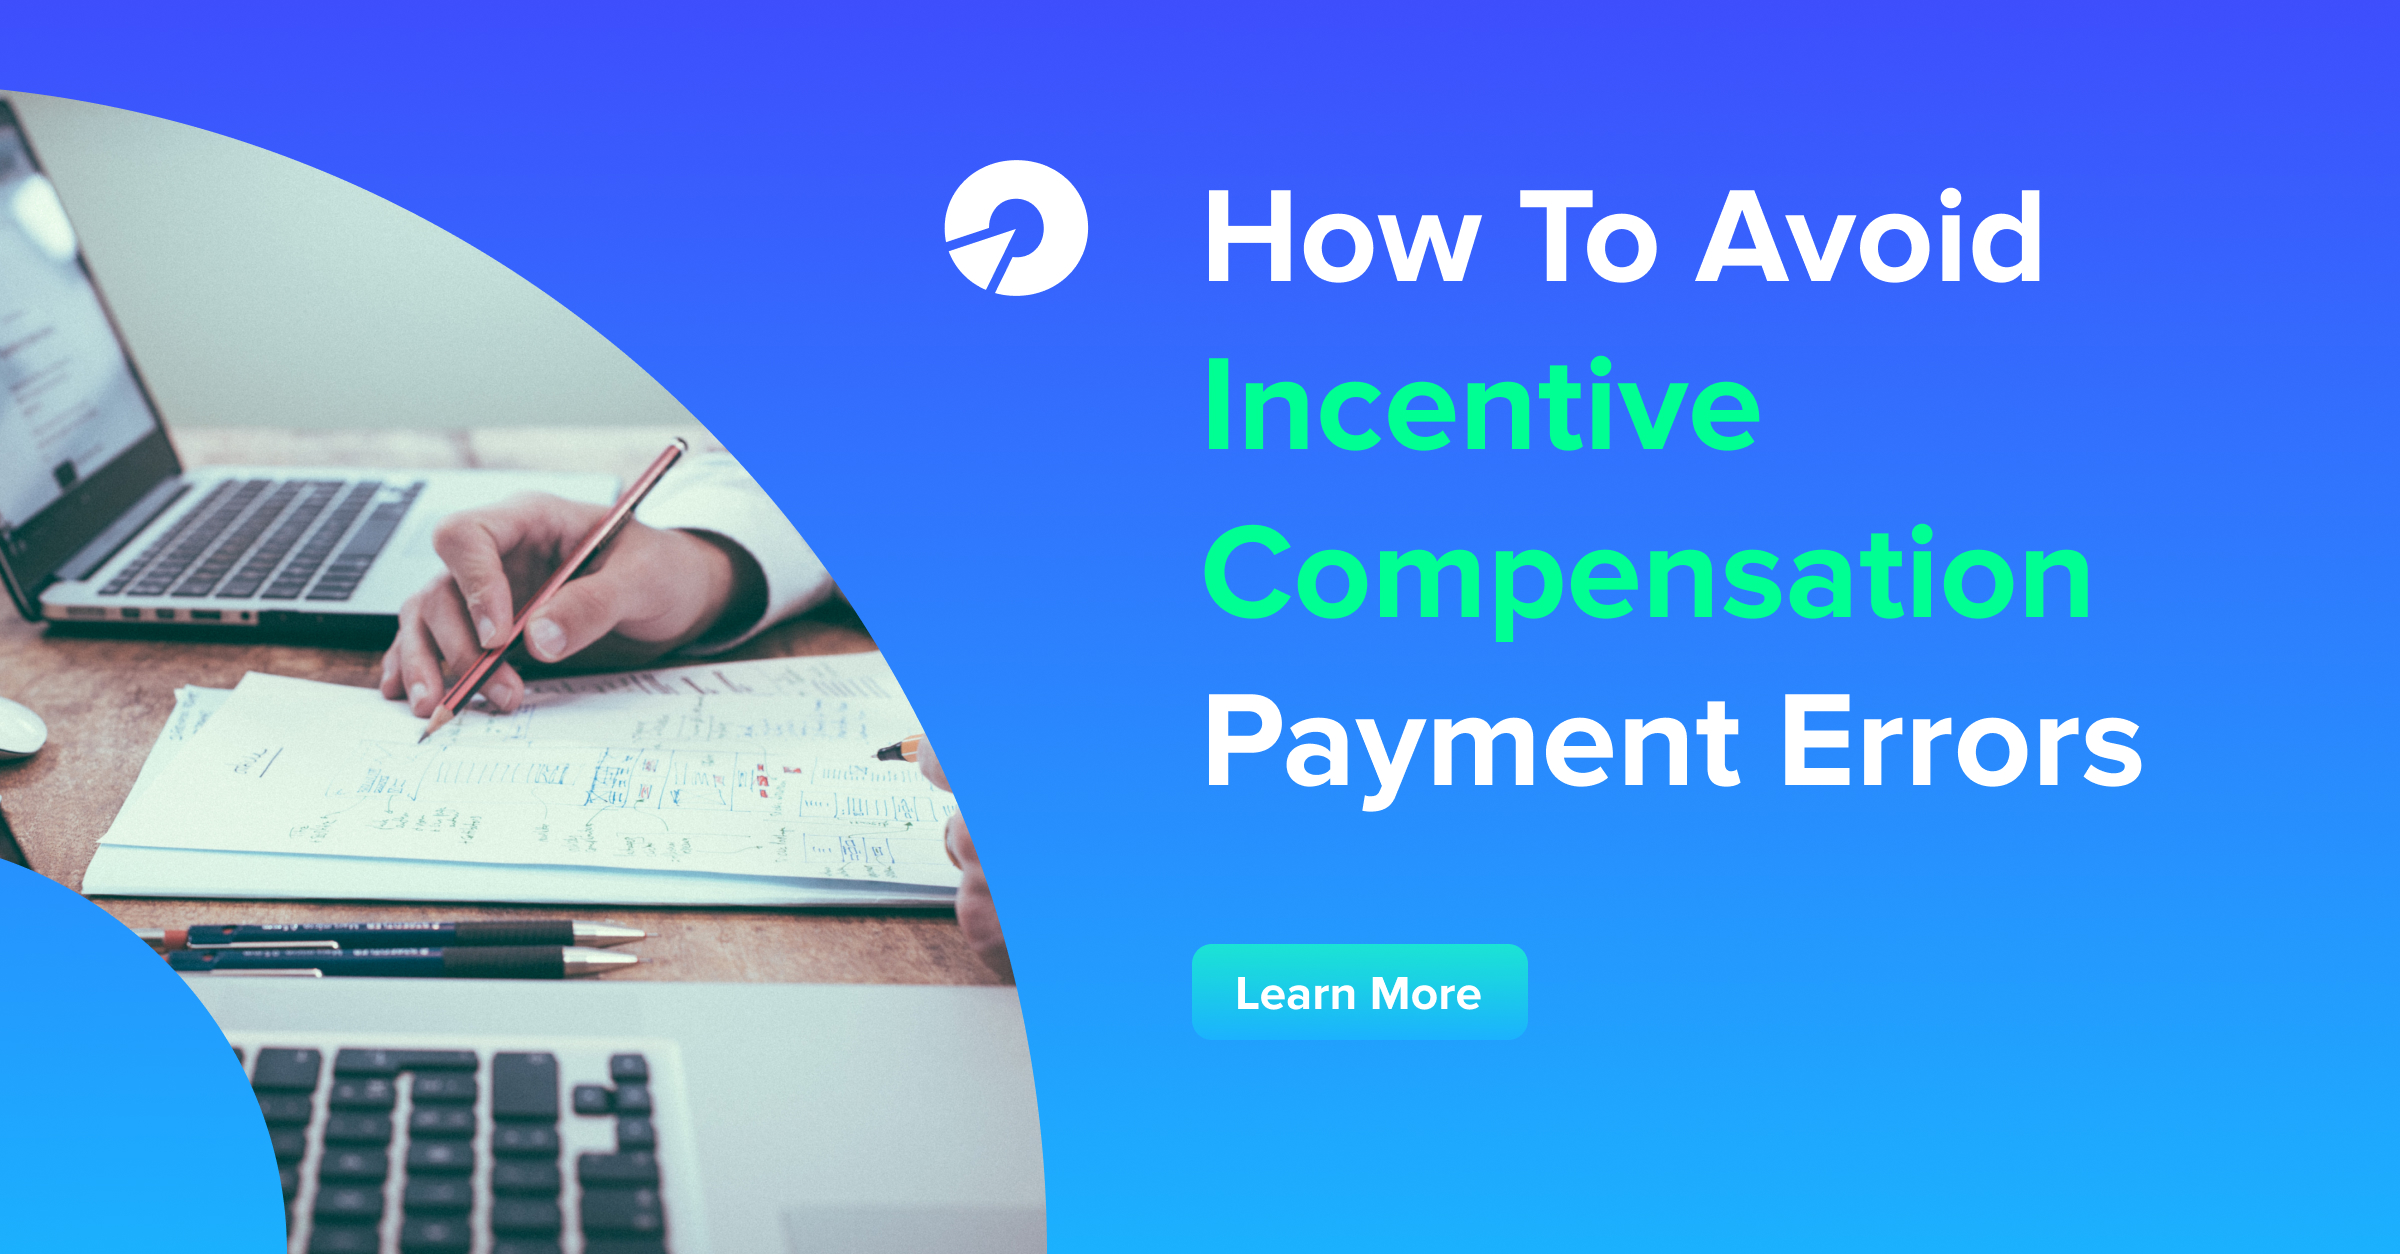 How To Avoid Incentive Compensation Payment Errors